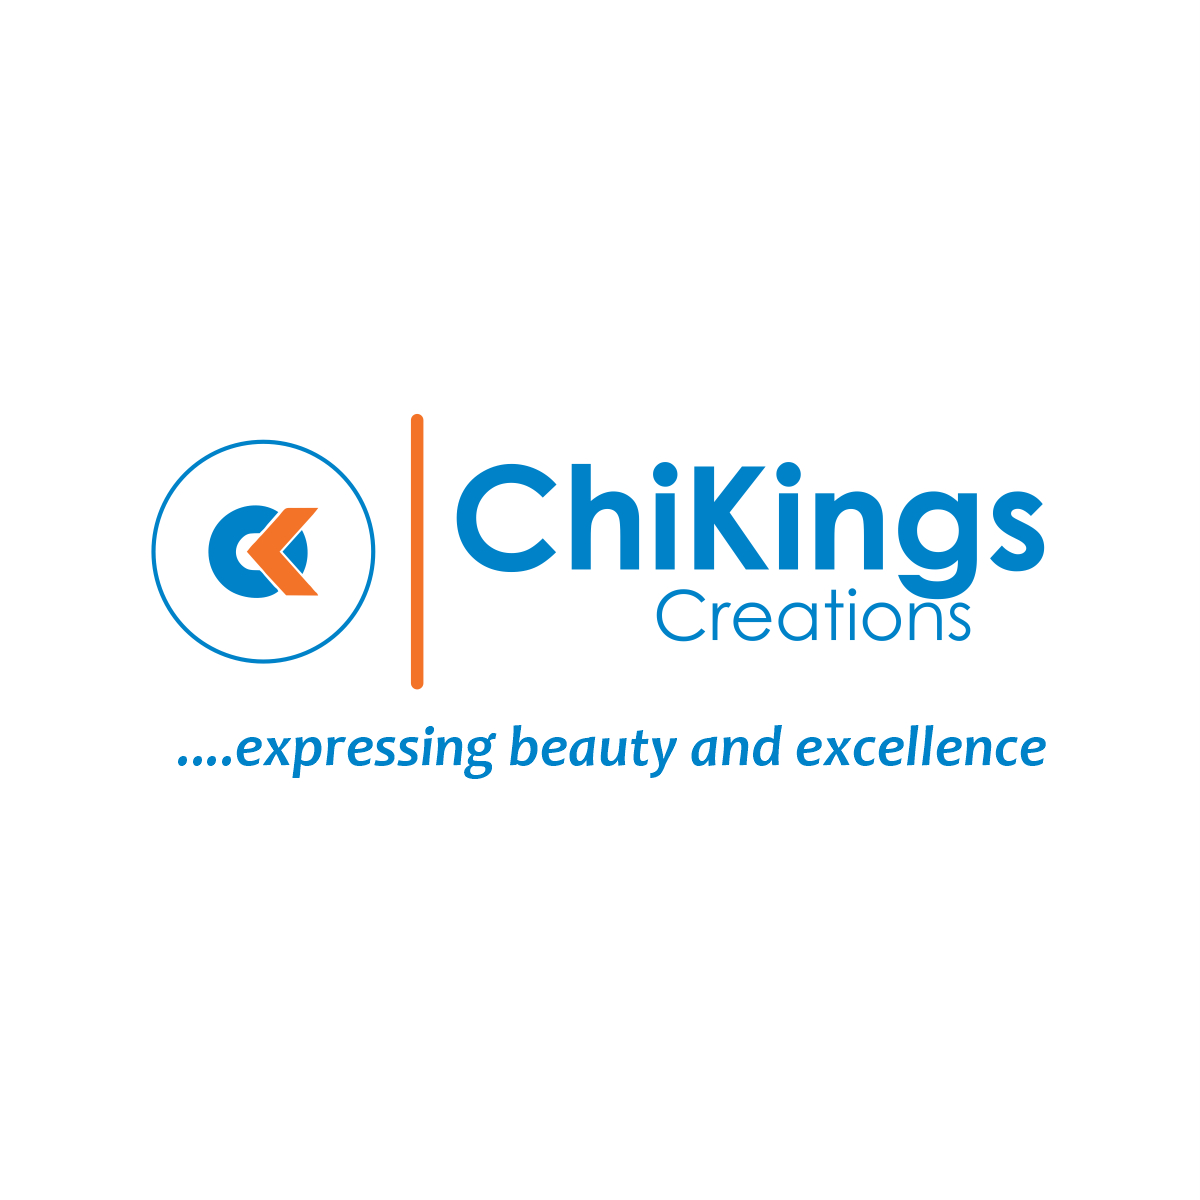 Chikings Creations provider